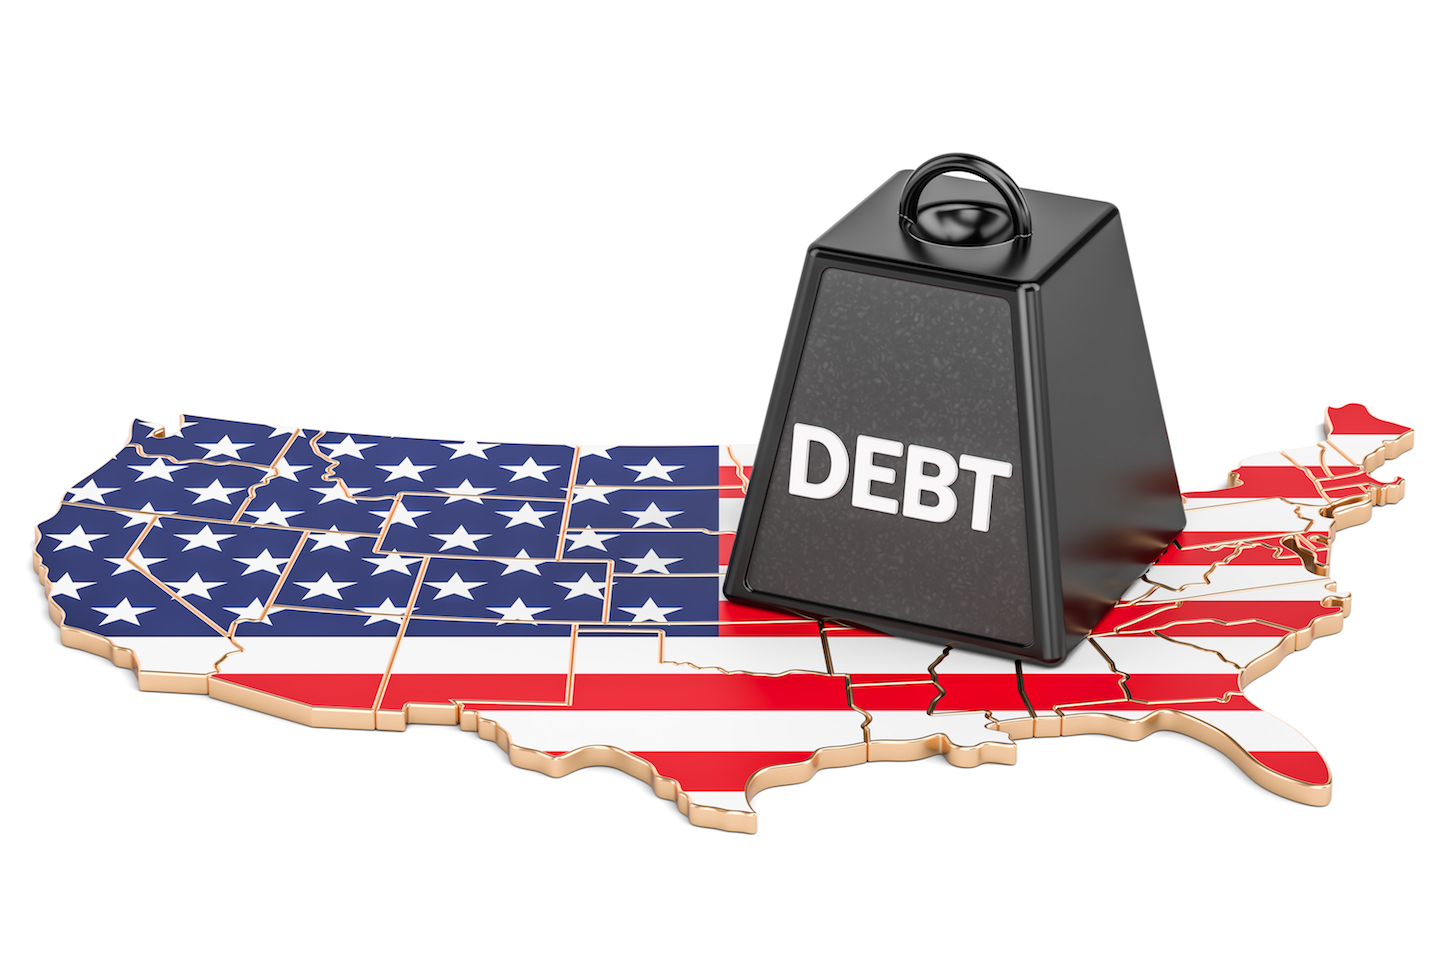 Unsecured debt & bankruptcy in the United States